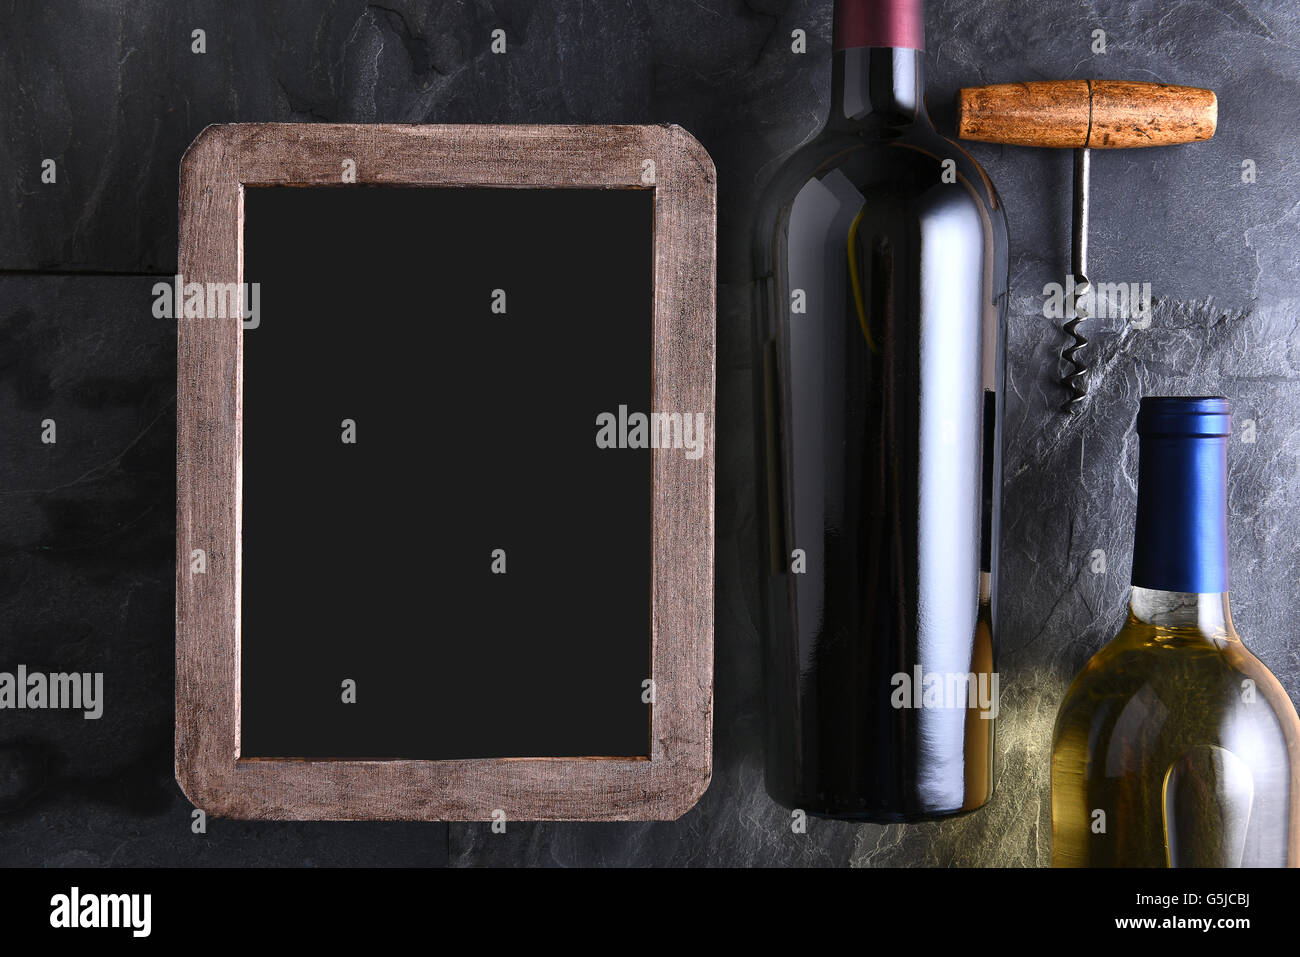 Top view of two wine bottles and corkscrew next to a blank chalk board wine list. Stock Photo